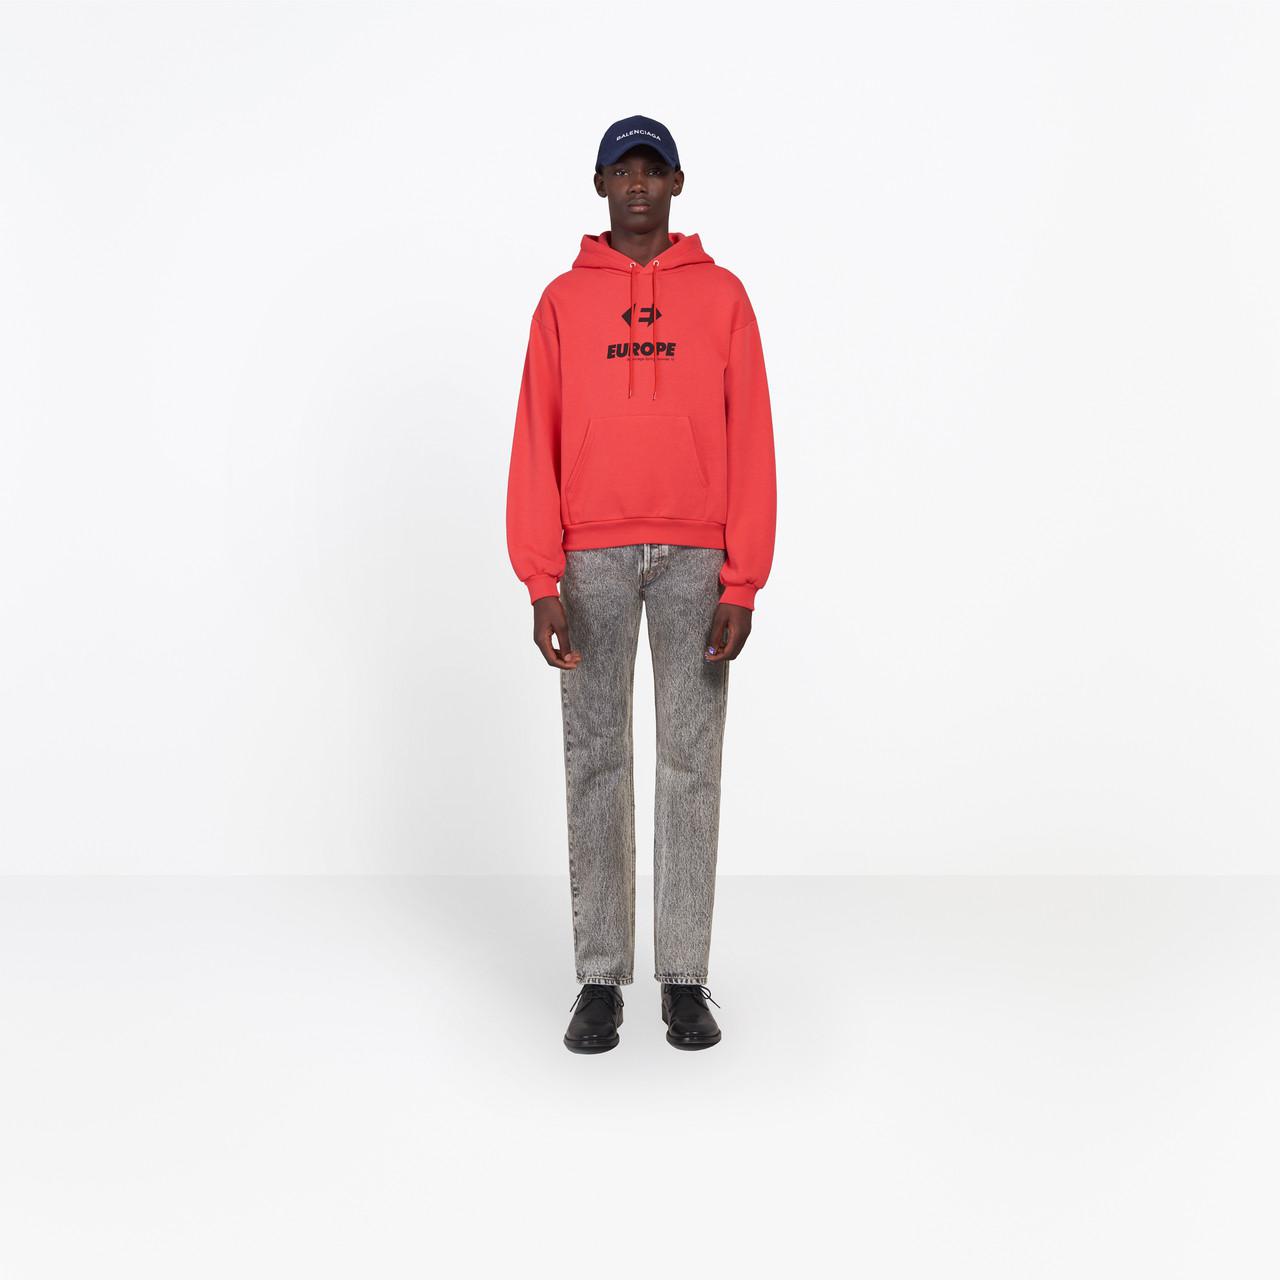 Balenciaga Cotton Europe Hoodie in Red for Men - Lyst